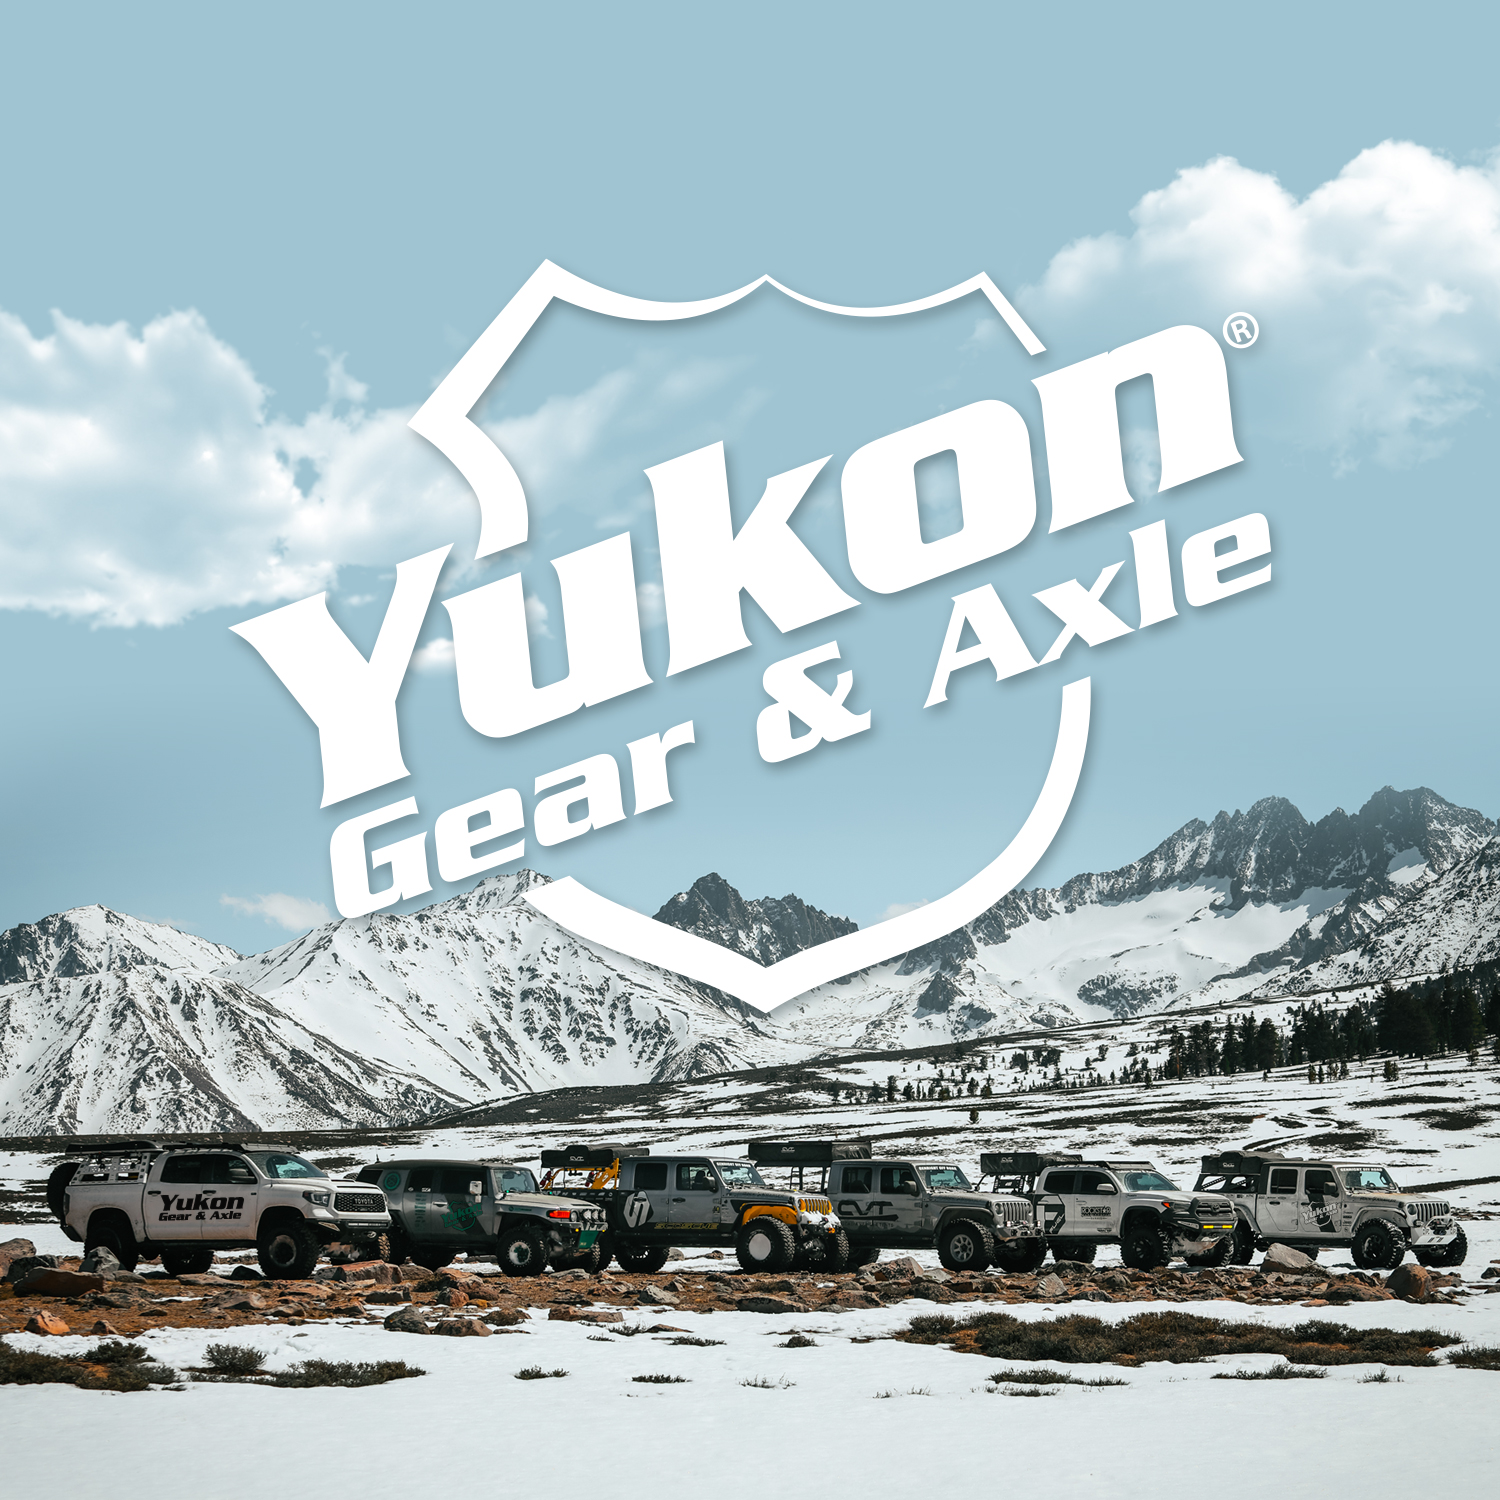 Yukon yoke for Toyota 7.5" IFS (and '85 and newer rear) with 23 spline pinion 